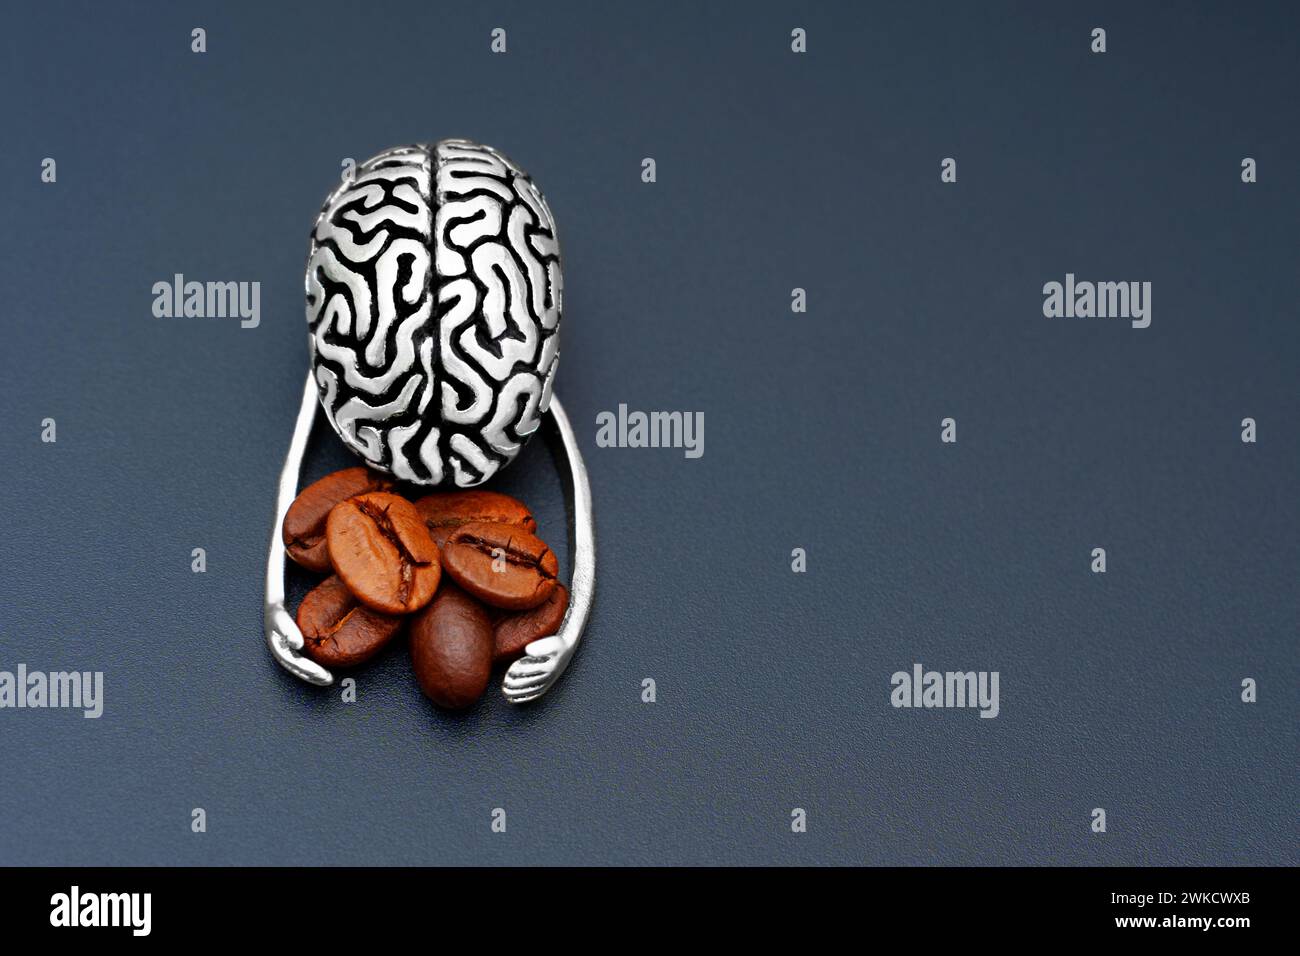 Anatomical human brain model tenderly gathering roasted coffee beans into its hands. Mind stimulating and addiction related concept. Stock Photo